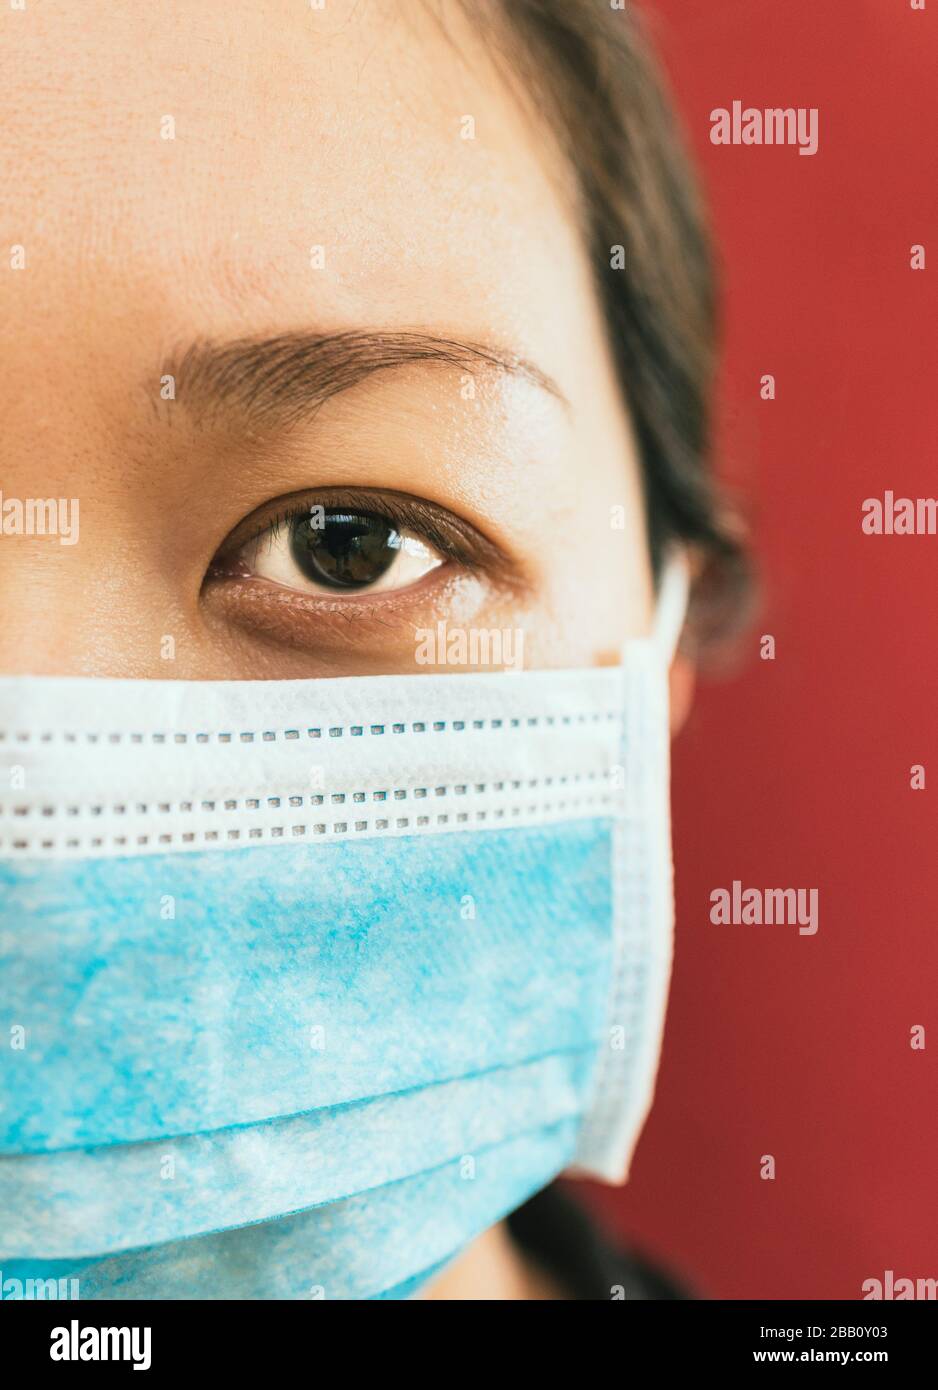 Coronavirus theme. Asian woman  wearing a mask to protect herself from getting infected on a red background. Stock Photo